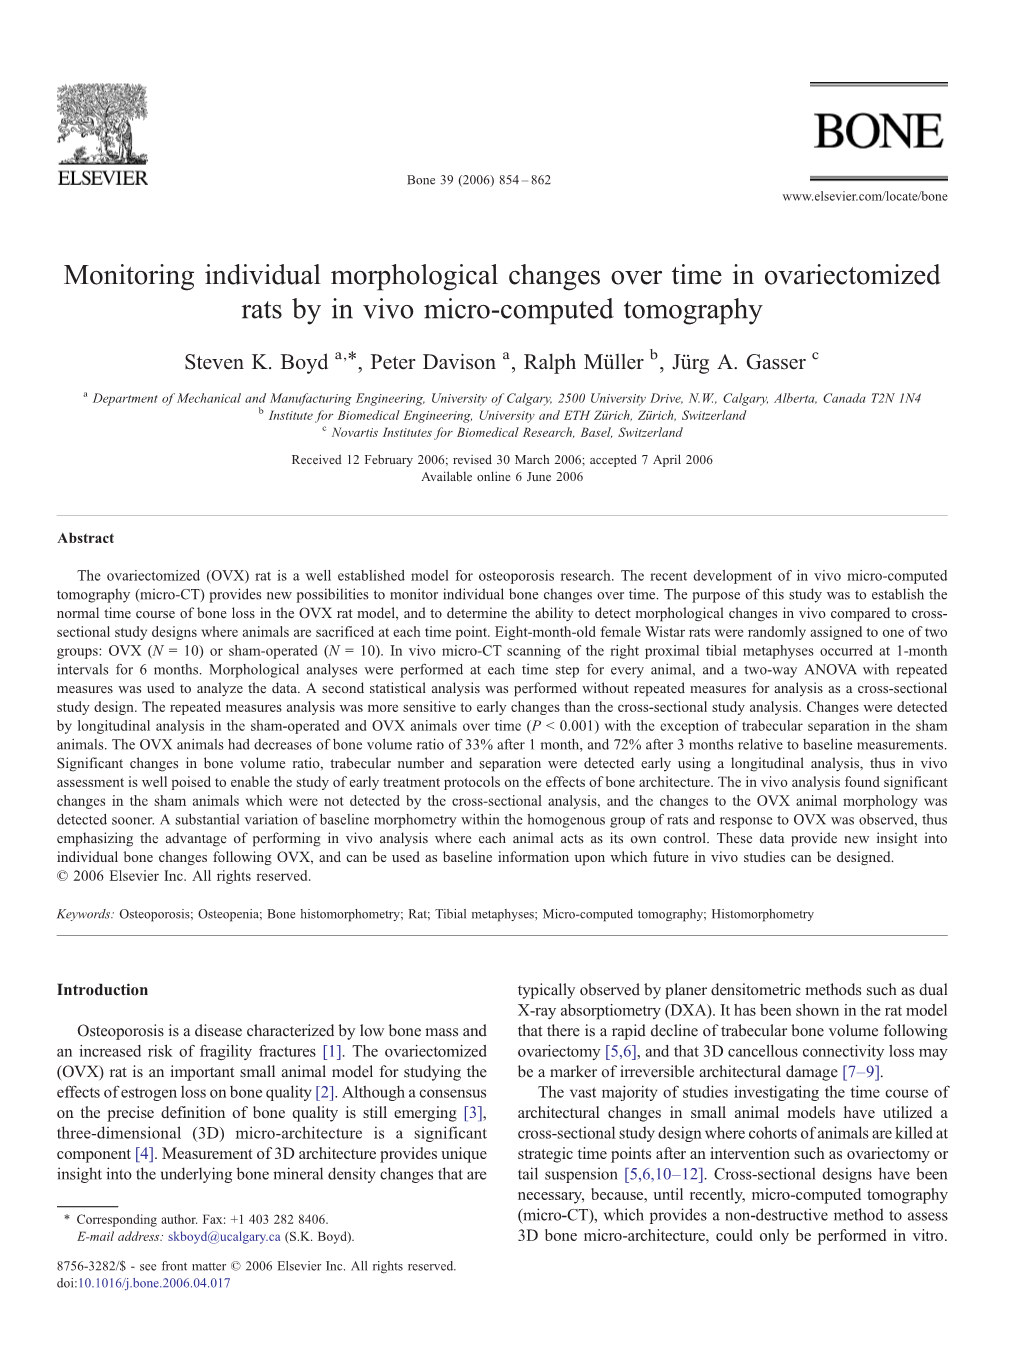 Monitoring Individual Morphological Changes Over Time in Ovariectomized Rats by in Vivo Micro-Computed Tomography ⁎ Steven K